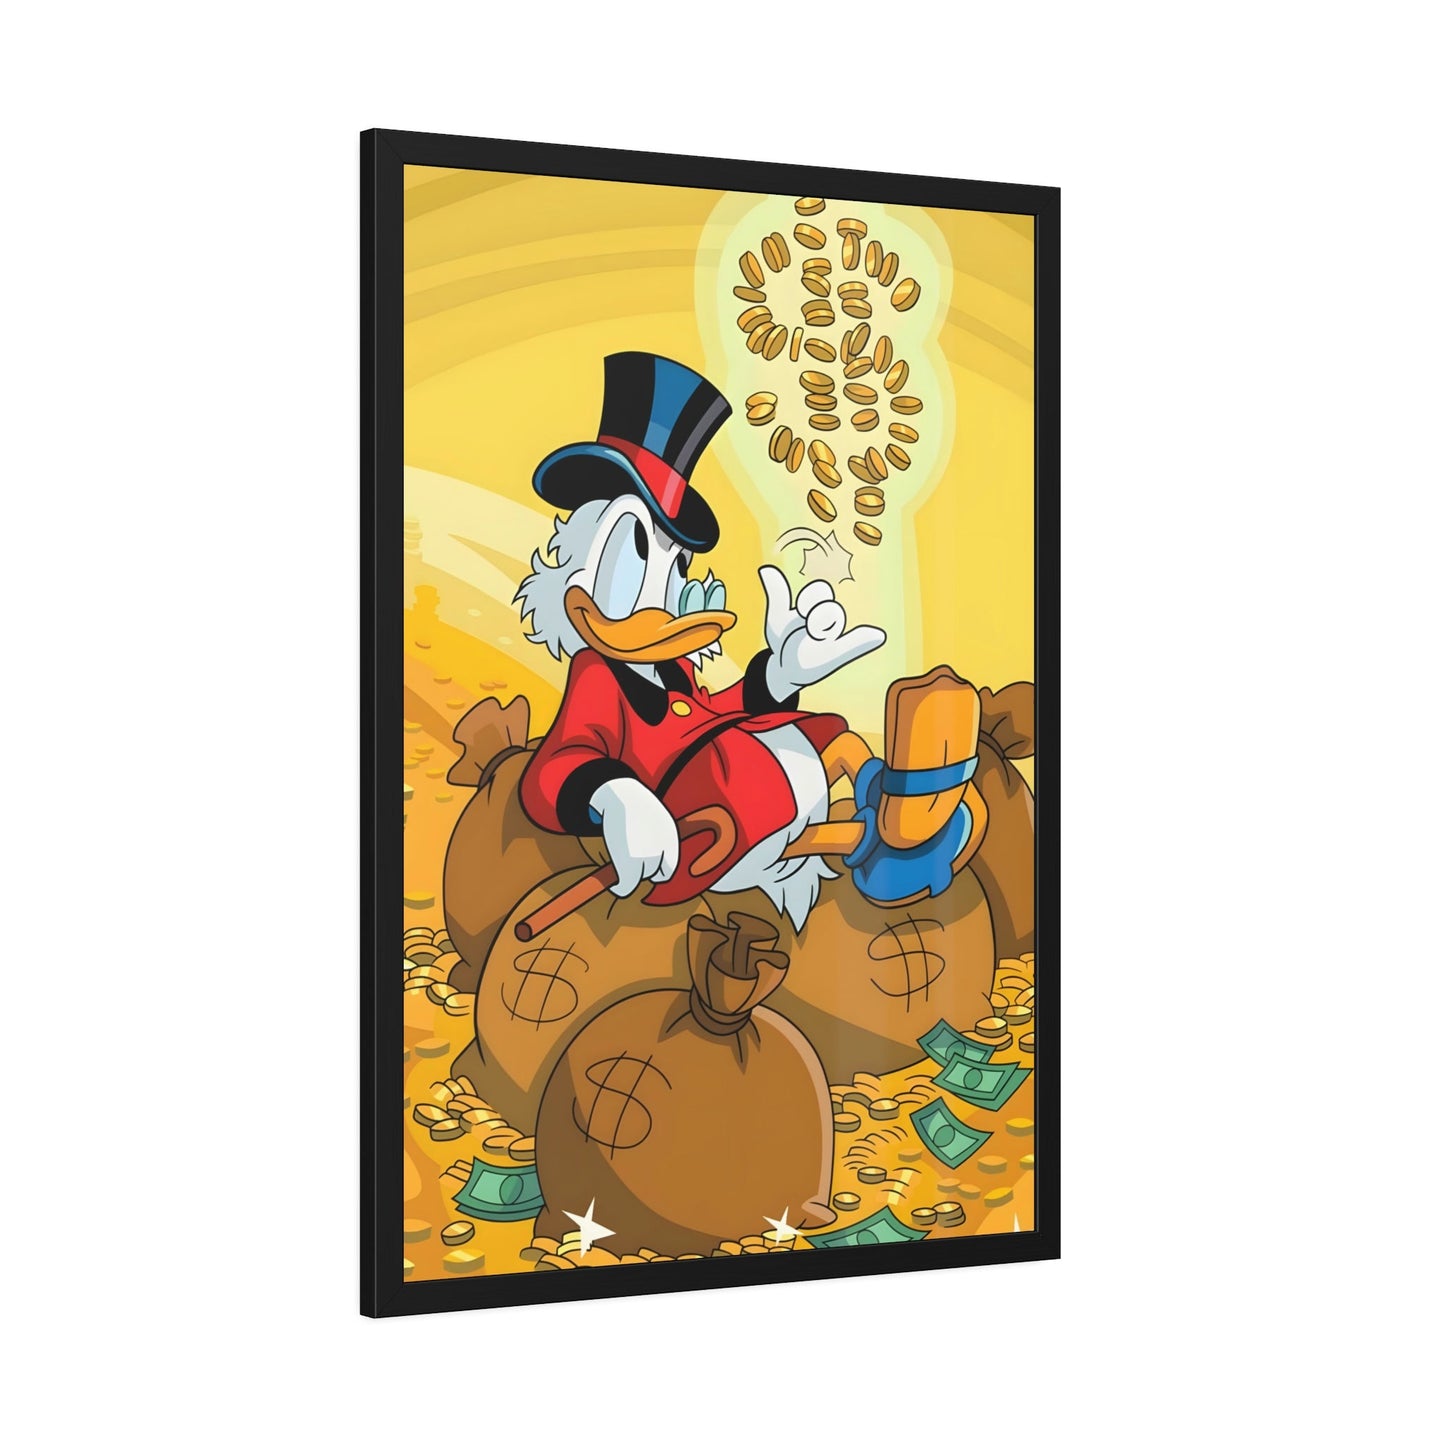 The Million-Dollar Duck: Street Art Style Canvas Print of a Duck by Alec Monopoly